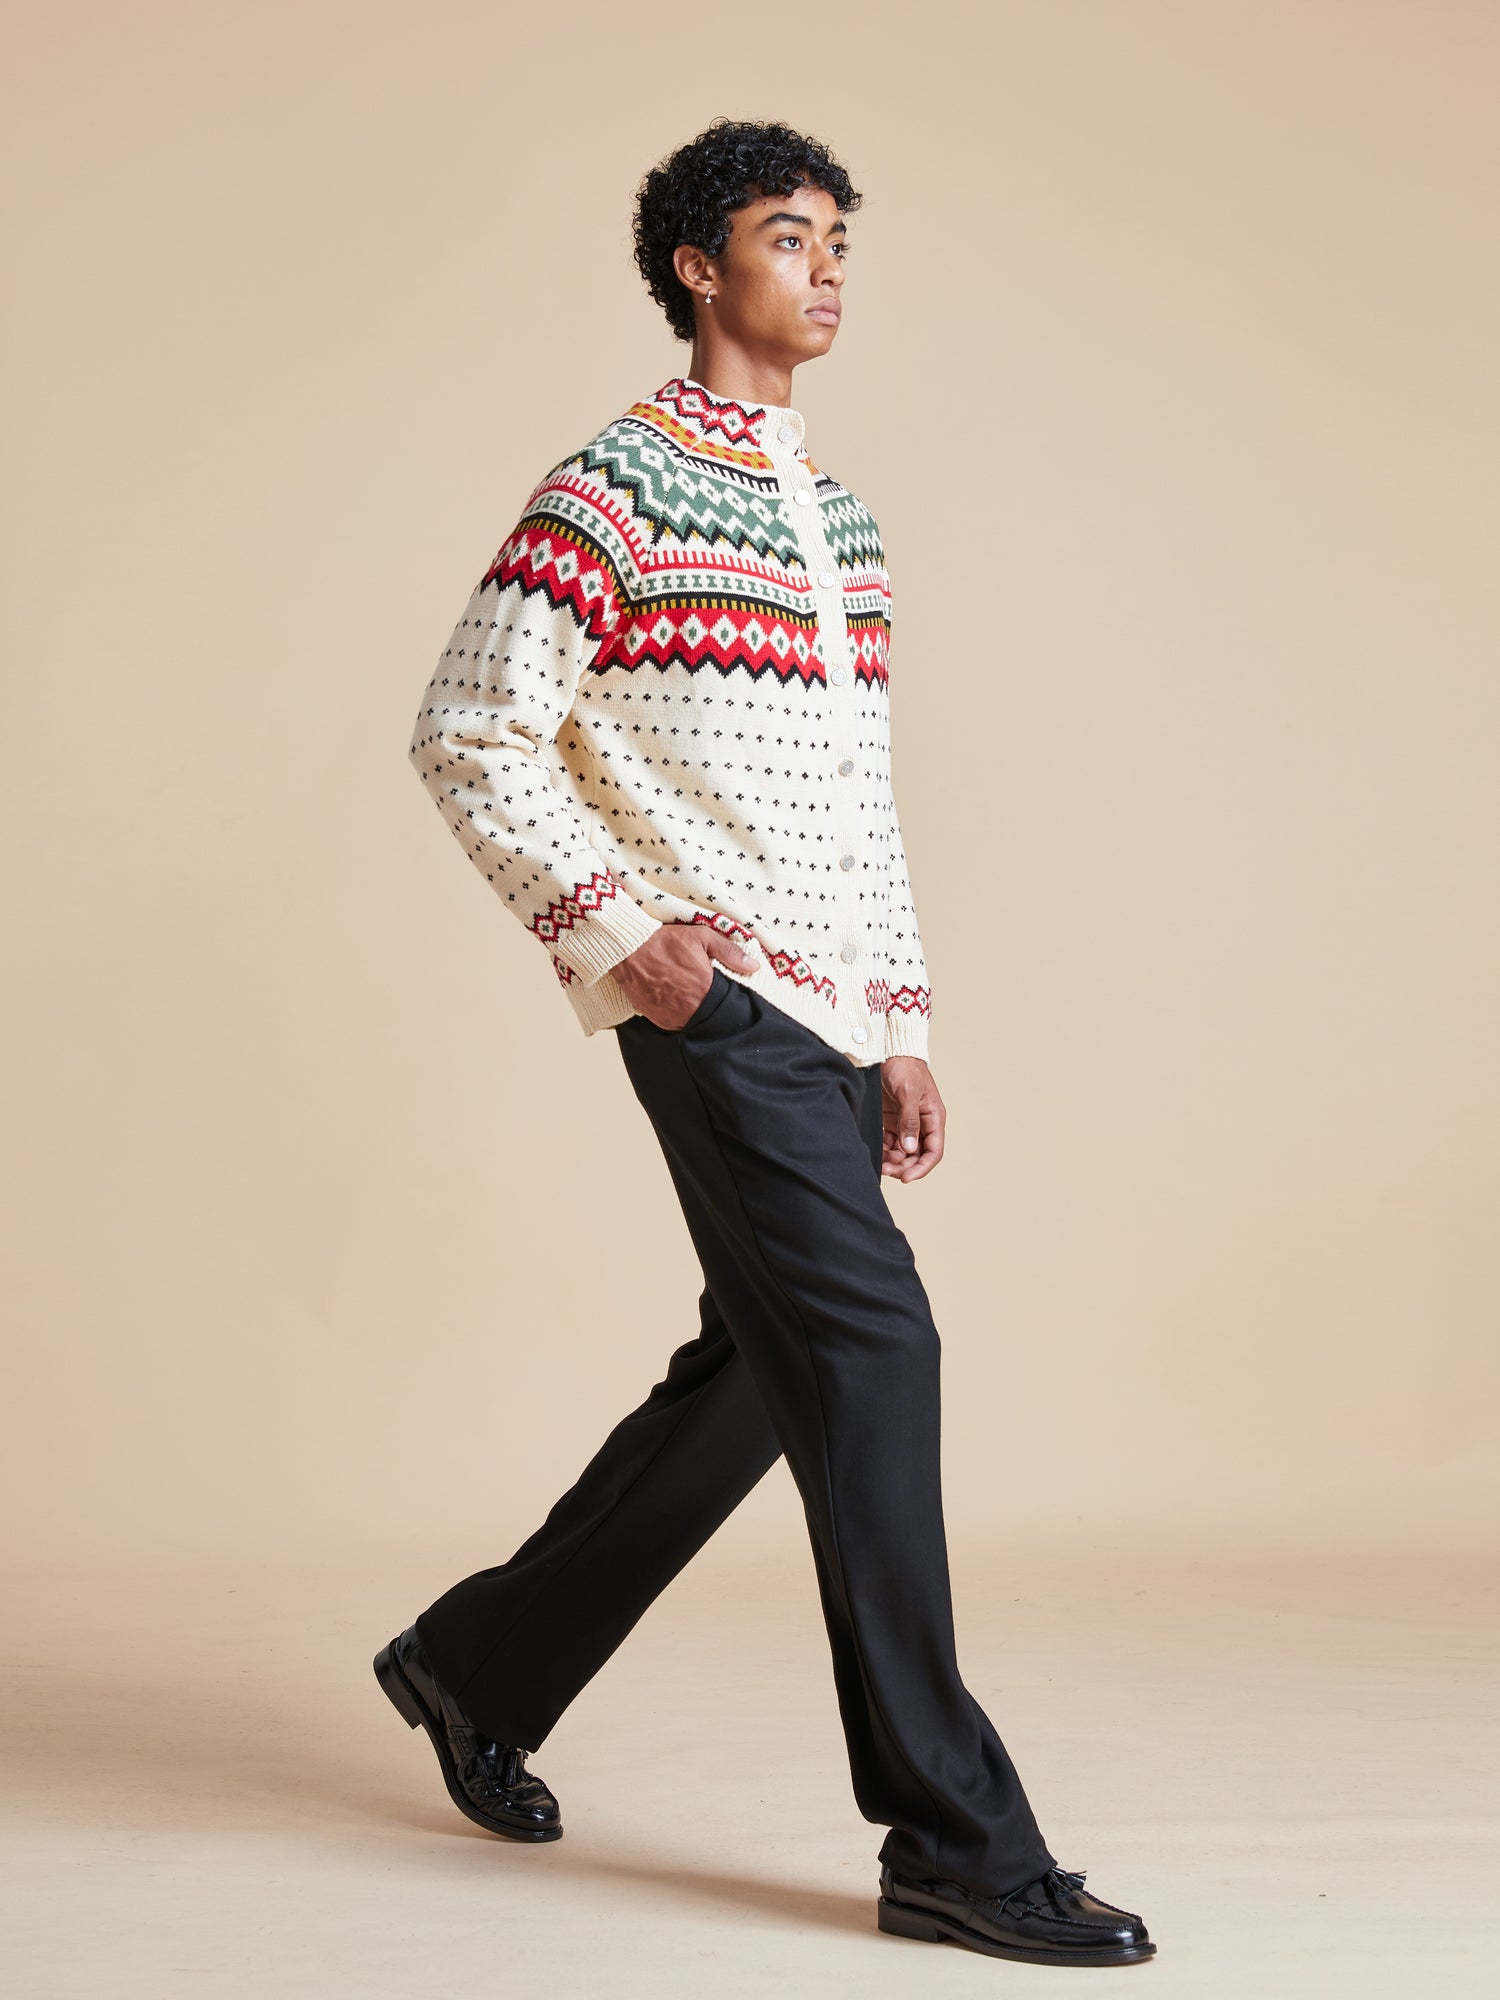 A man in a Harwan Isles Sweater walking on a beige background, pre-order option available. (Brand Name: Found)